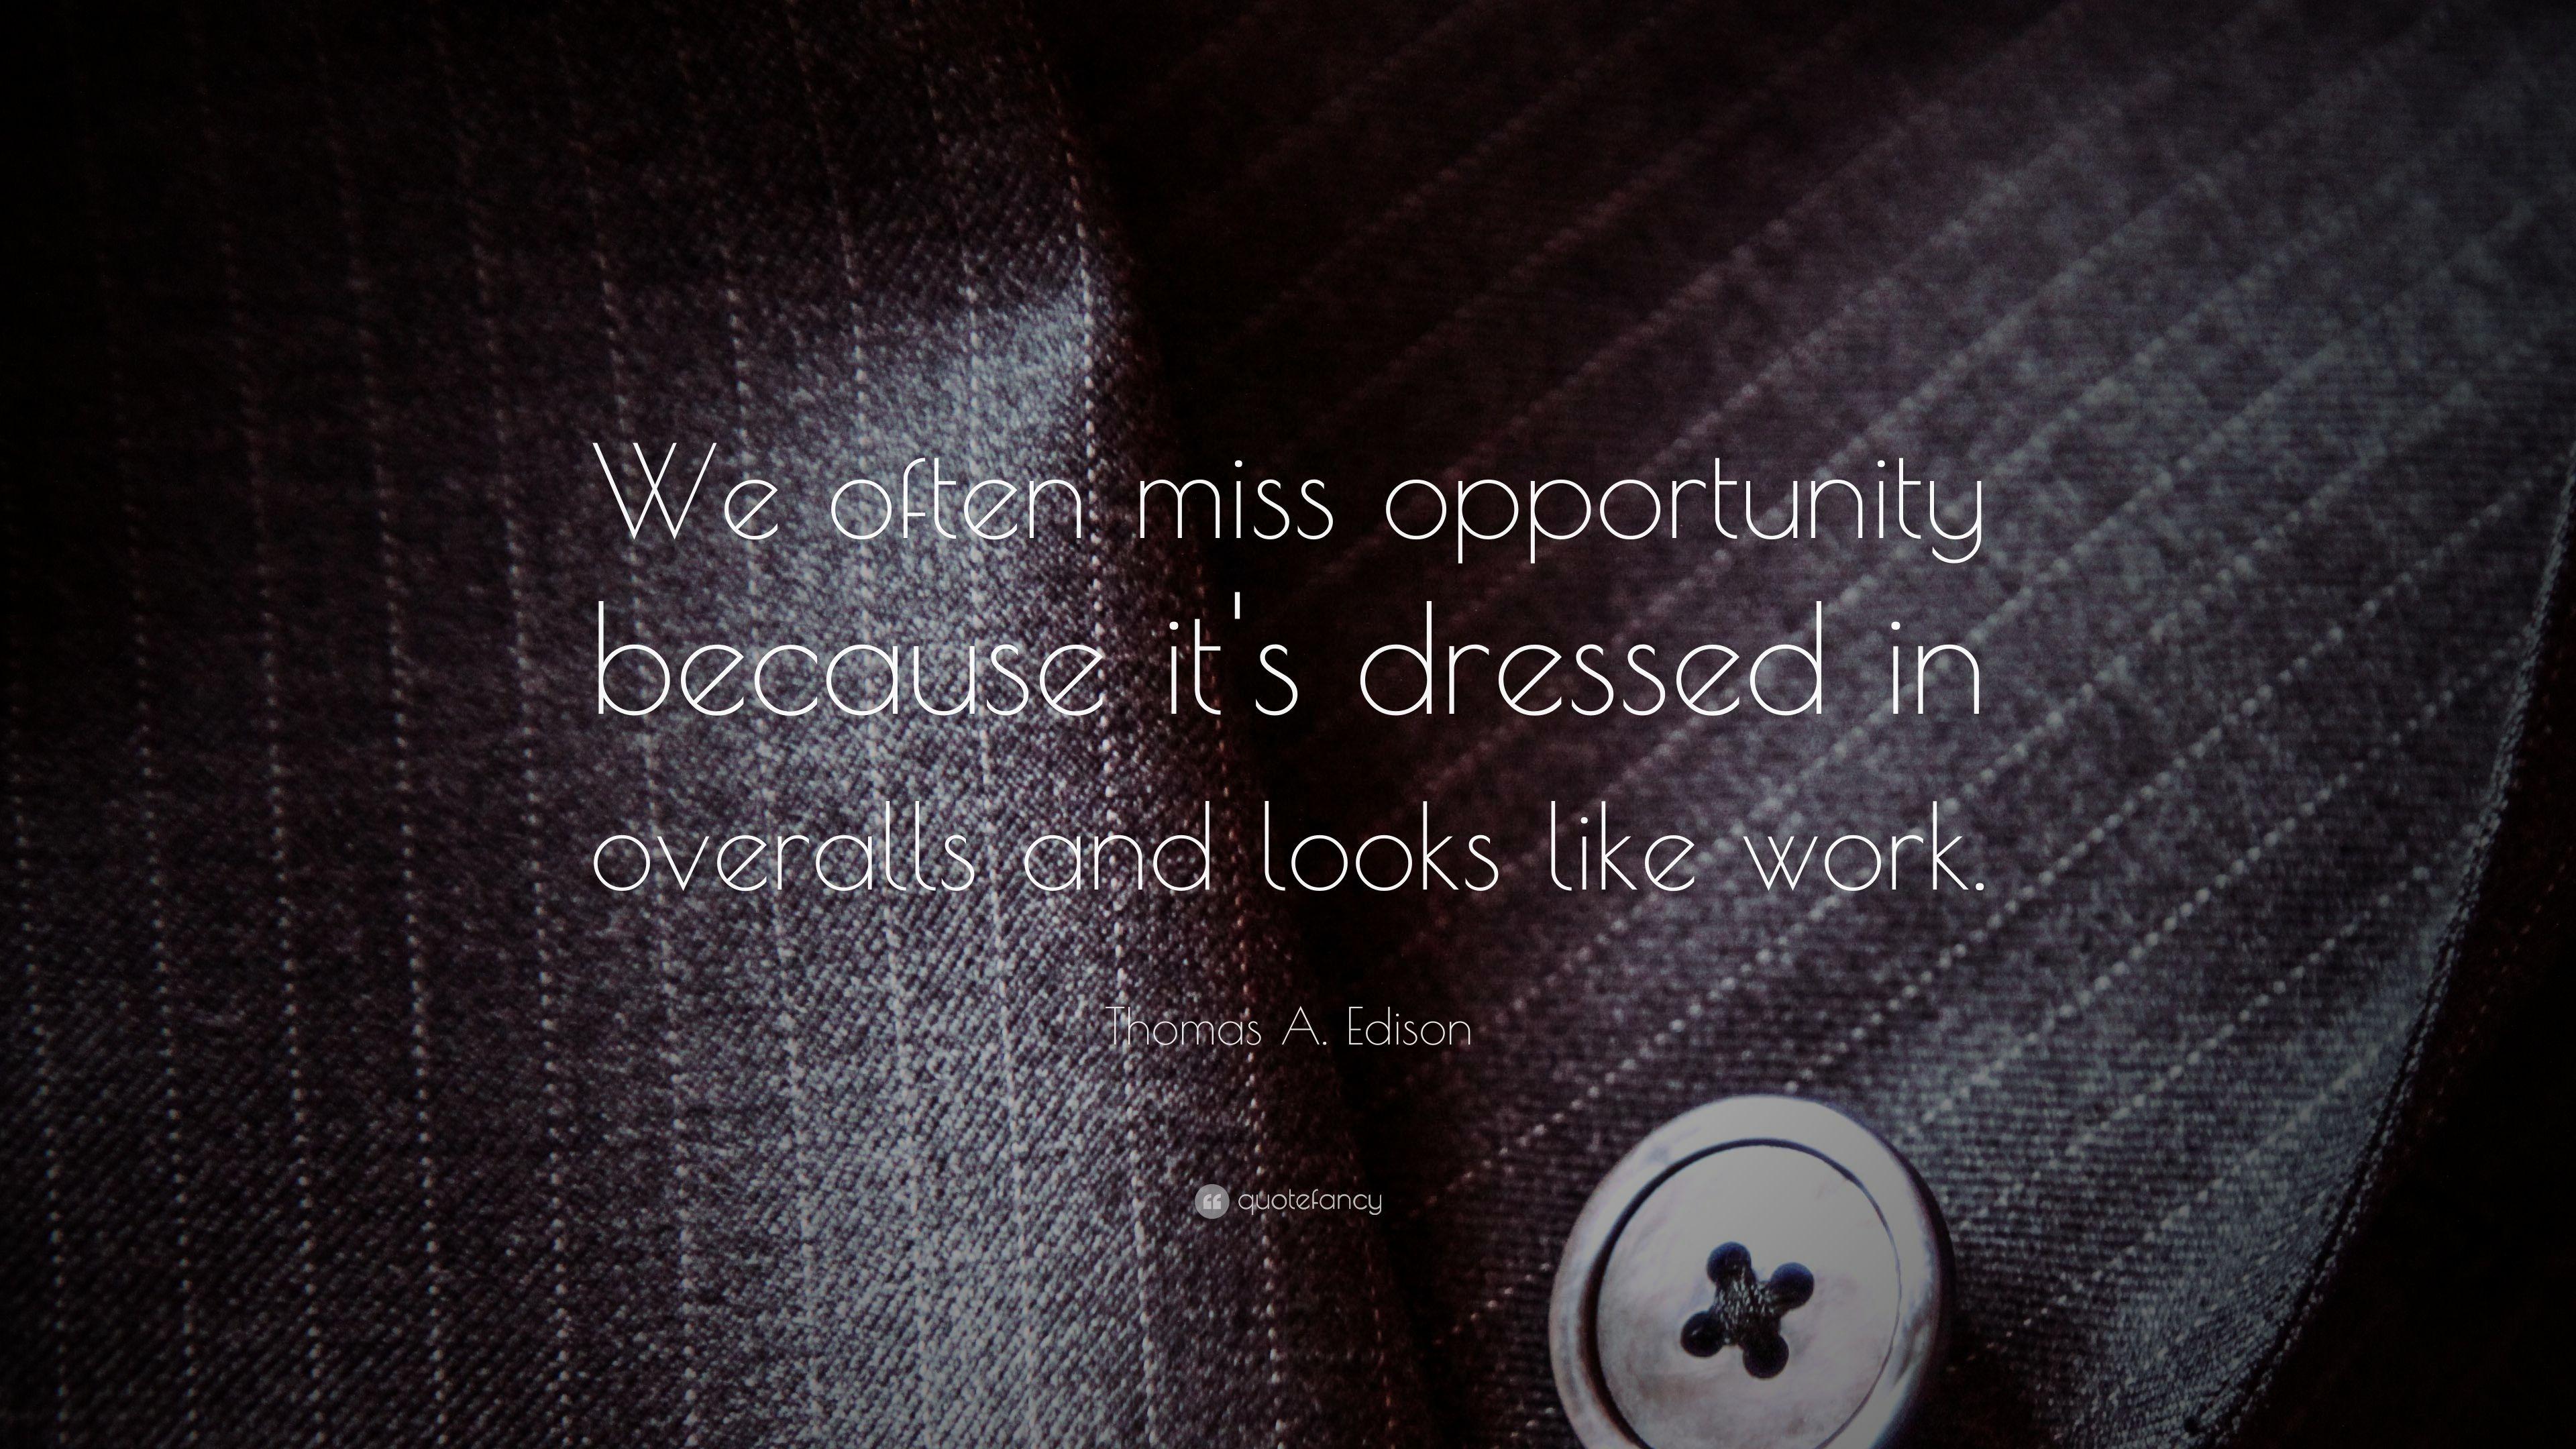 Thomas A. Edison Quote: “We often miss opportunity because it's